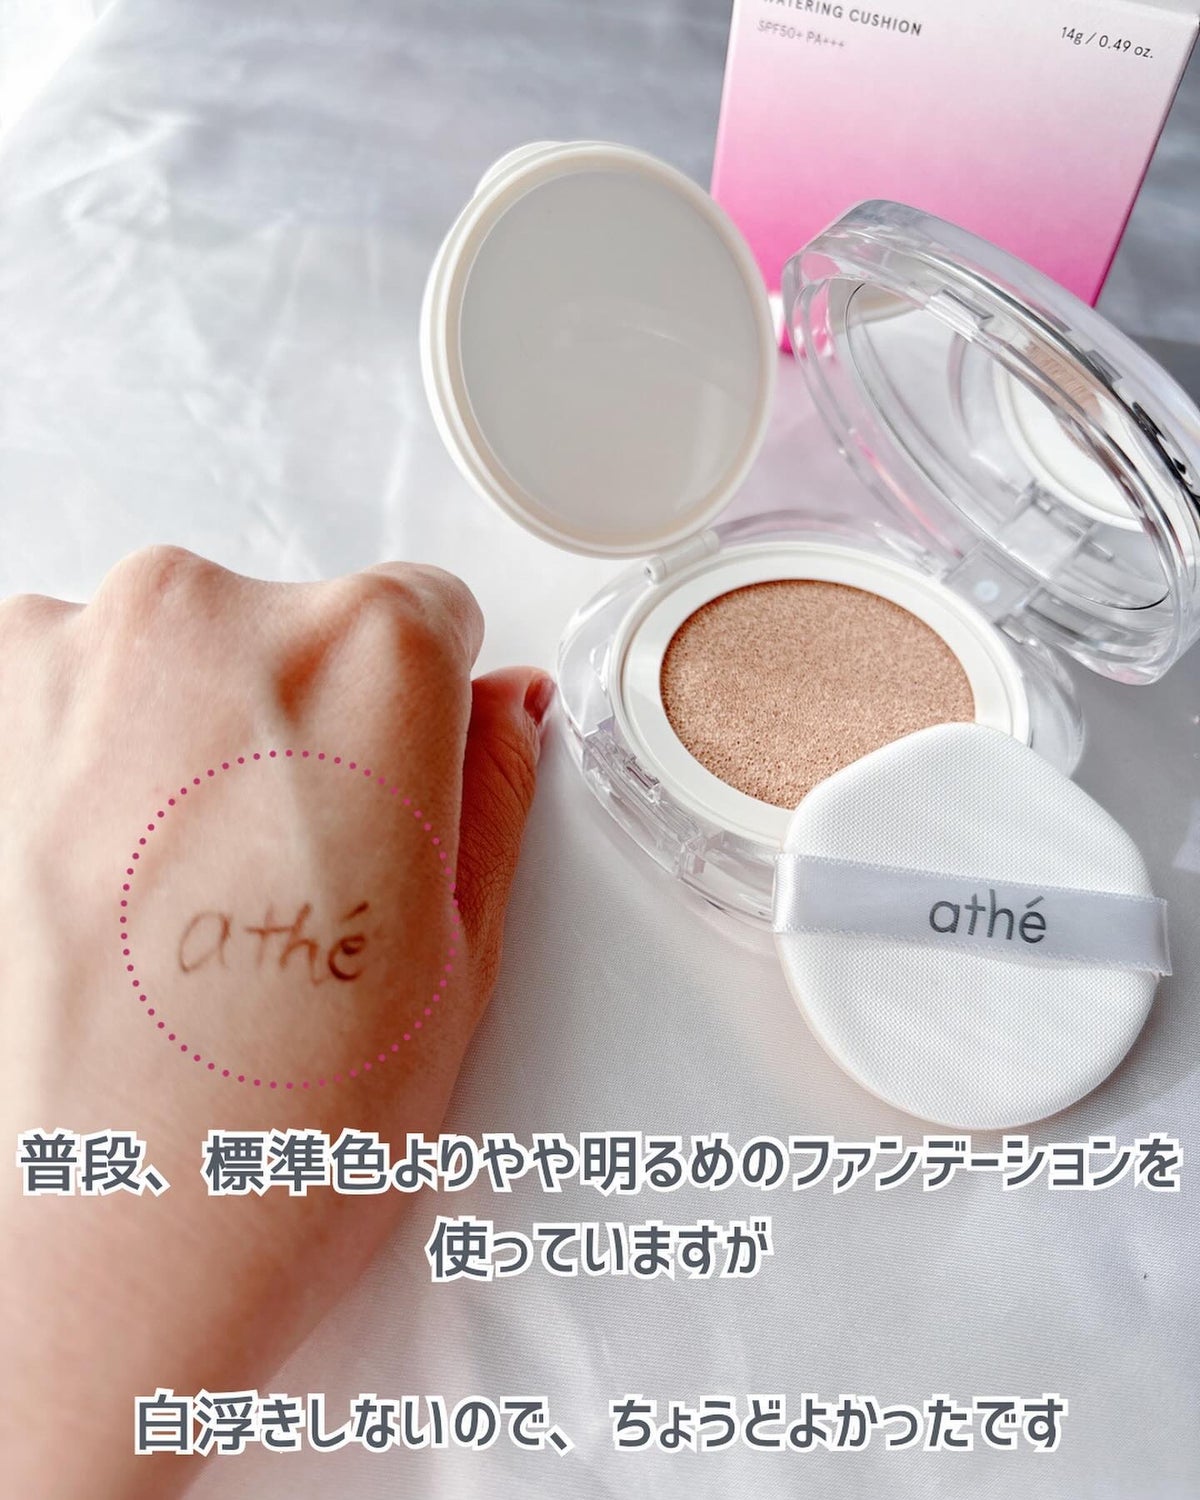 GLAZM WATERLING CUSHION｜atheの口コミ - athe @athe.japan by あや 